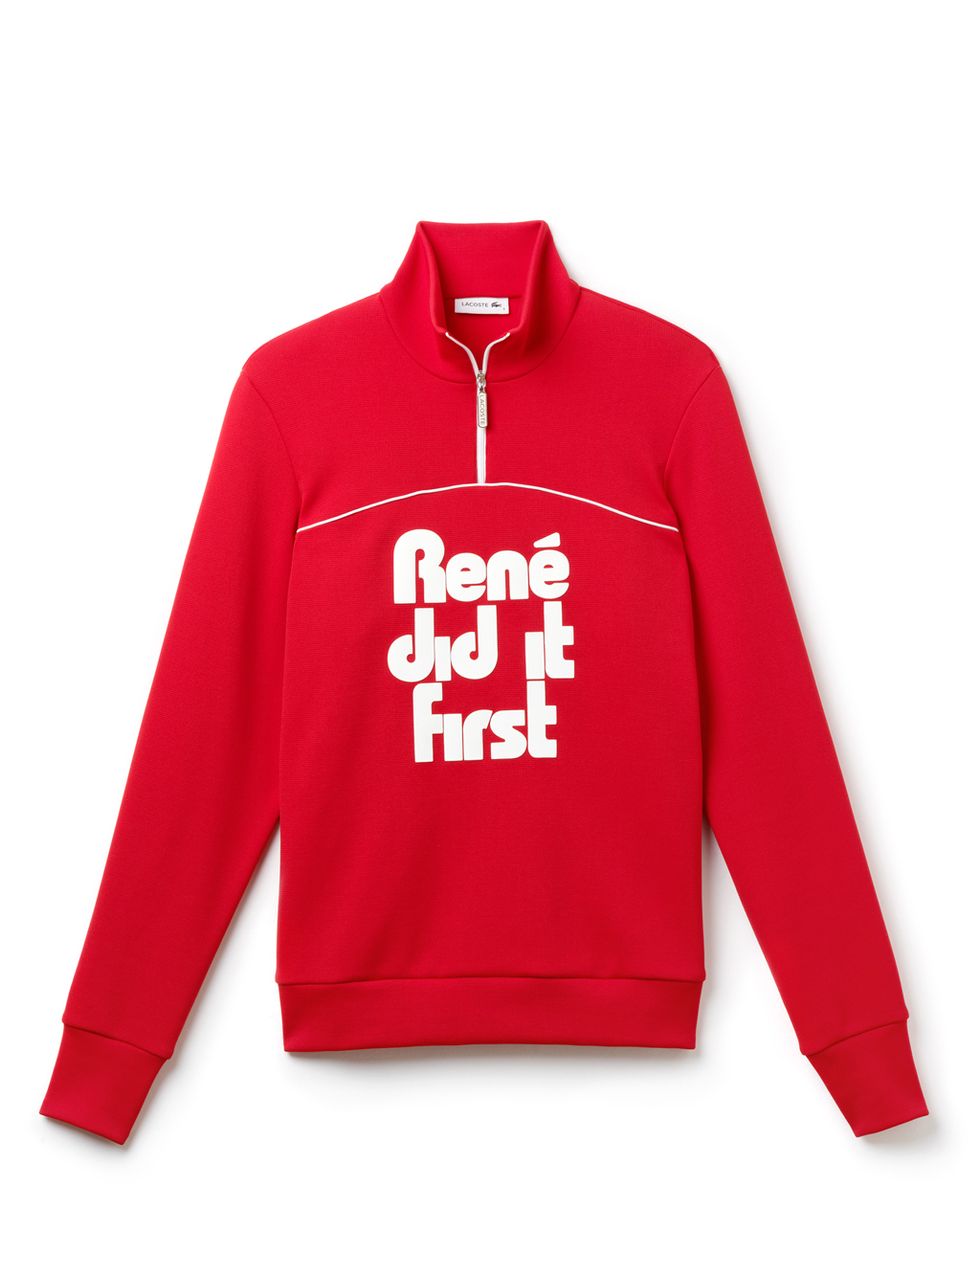 Product, Sleeve, Sportswear, Jersey, Text, Collar, Textile, Red, White, Sweatshirt, 